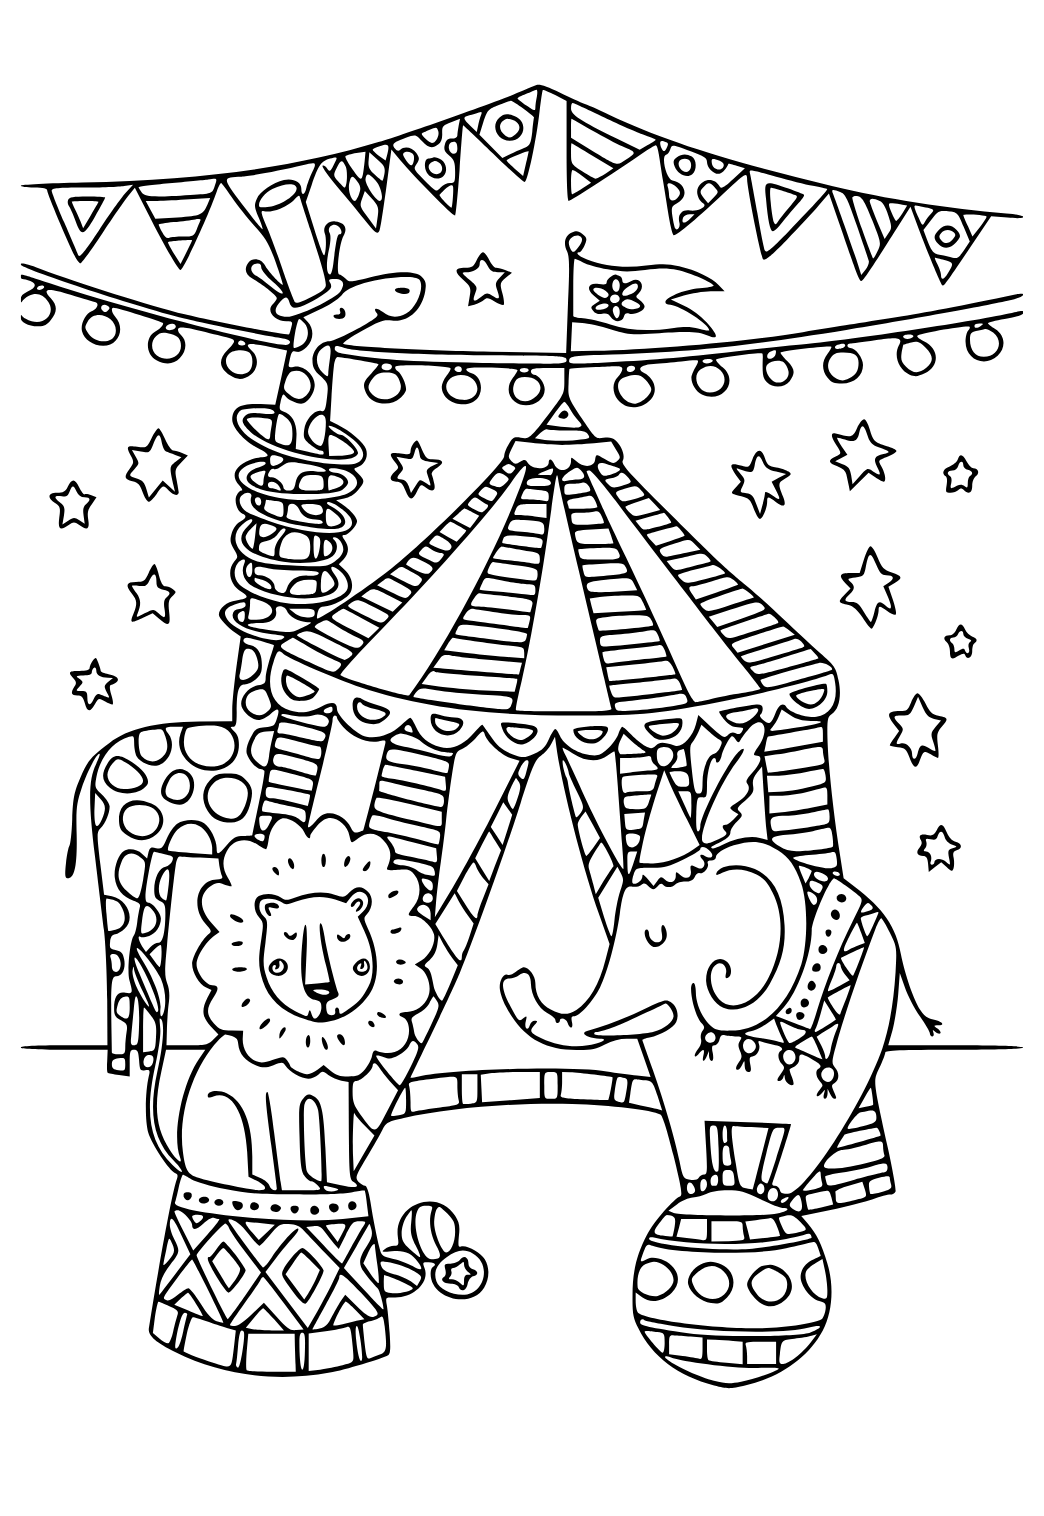 Free printable circus animals coloring page for adults and kids